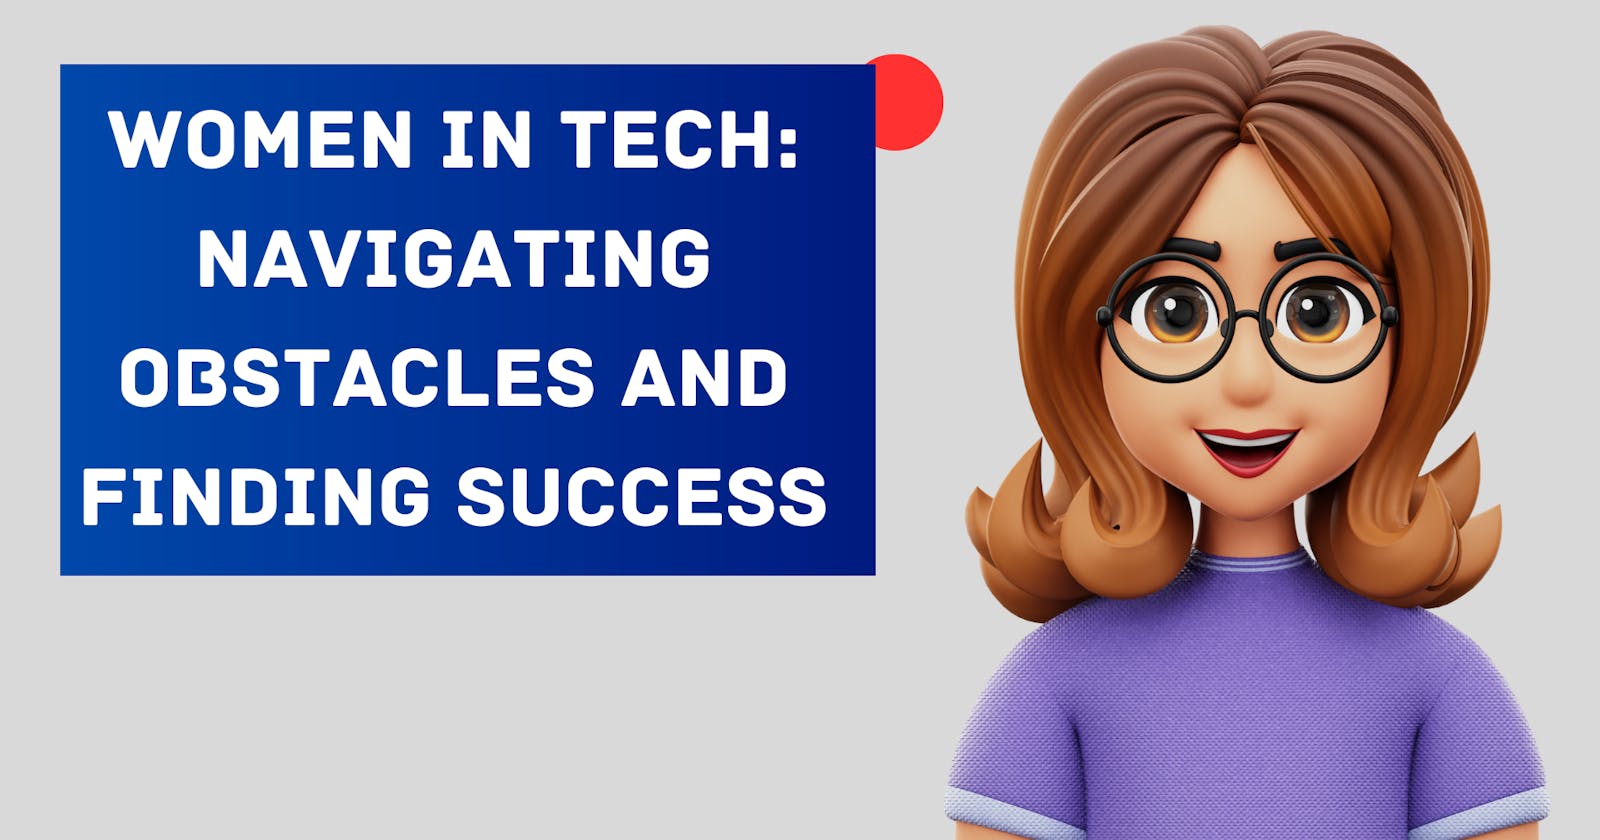 Women in Tech: Navigating Obstacles and Finding Success